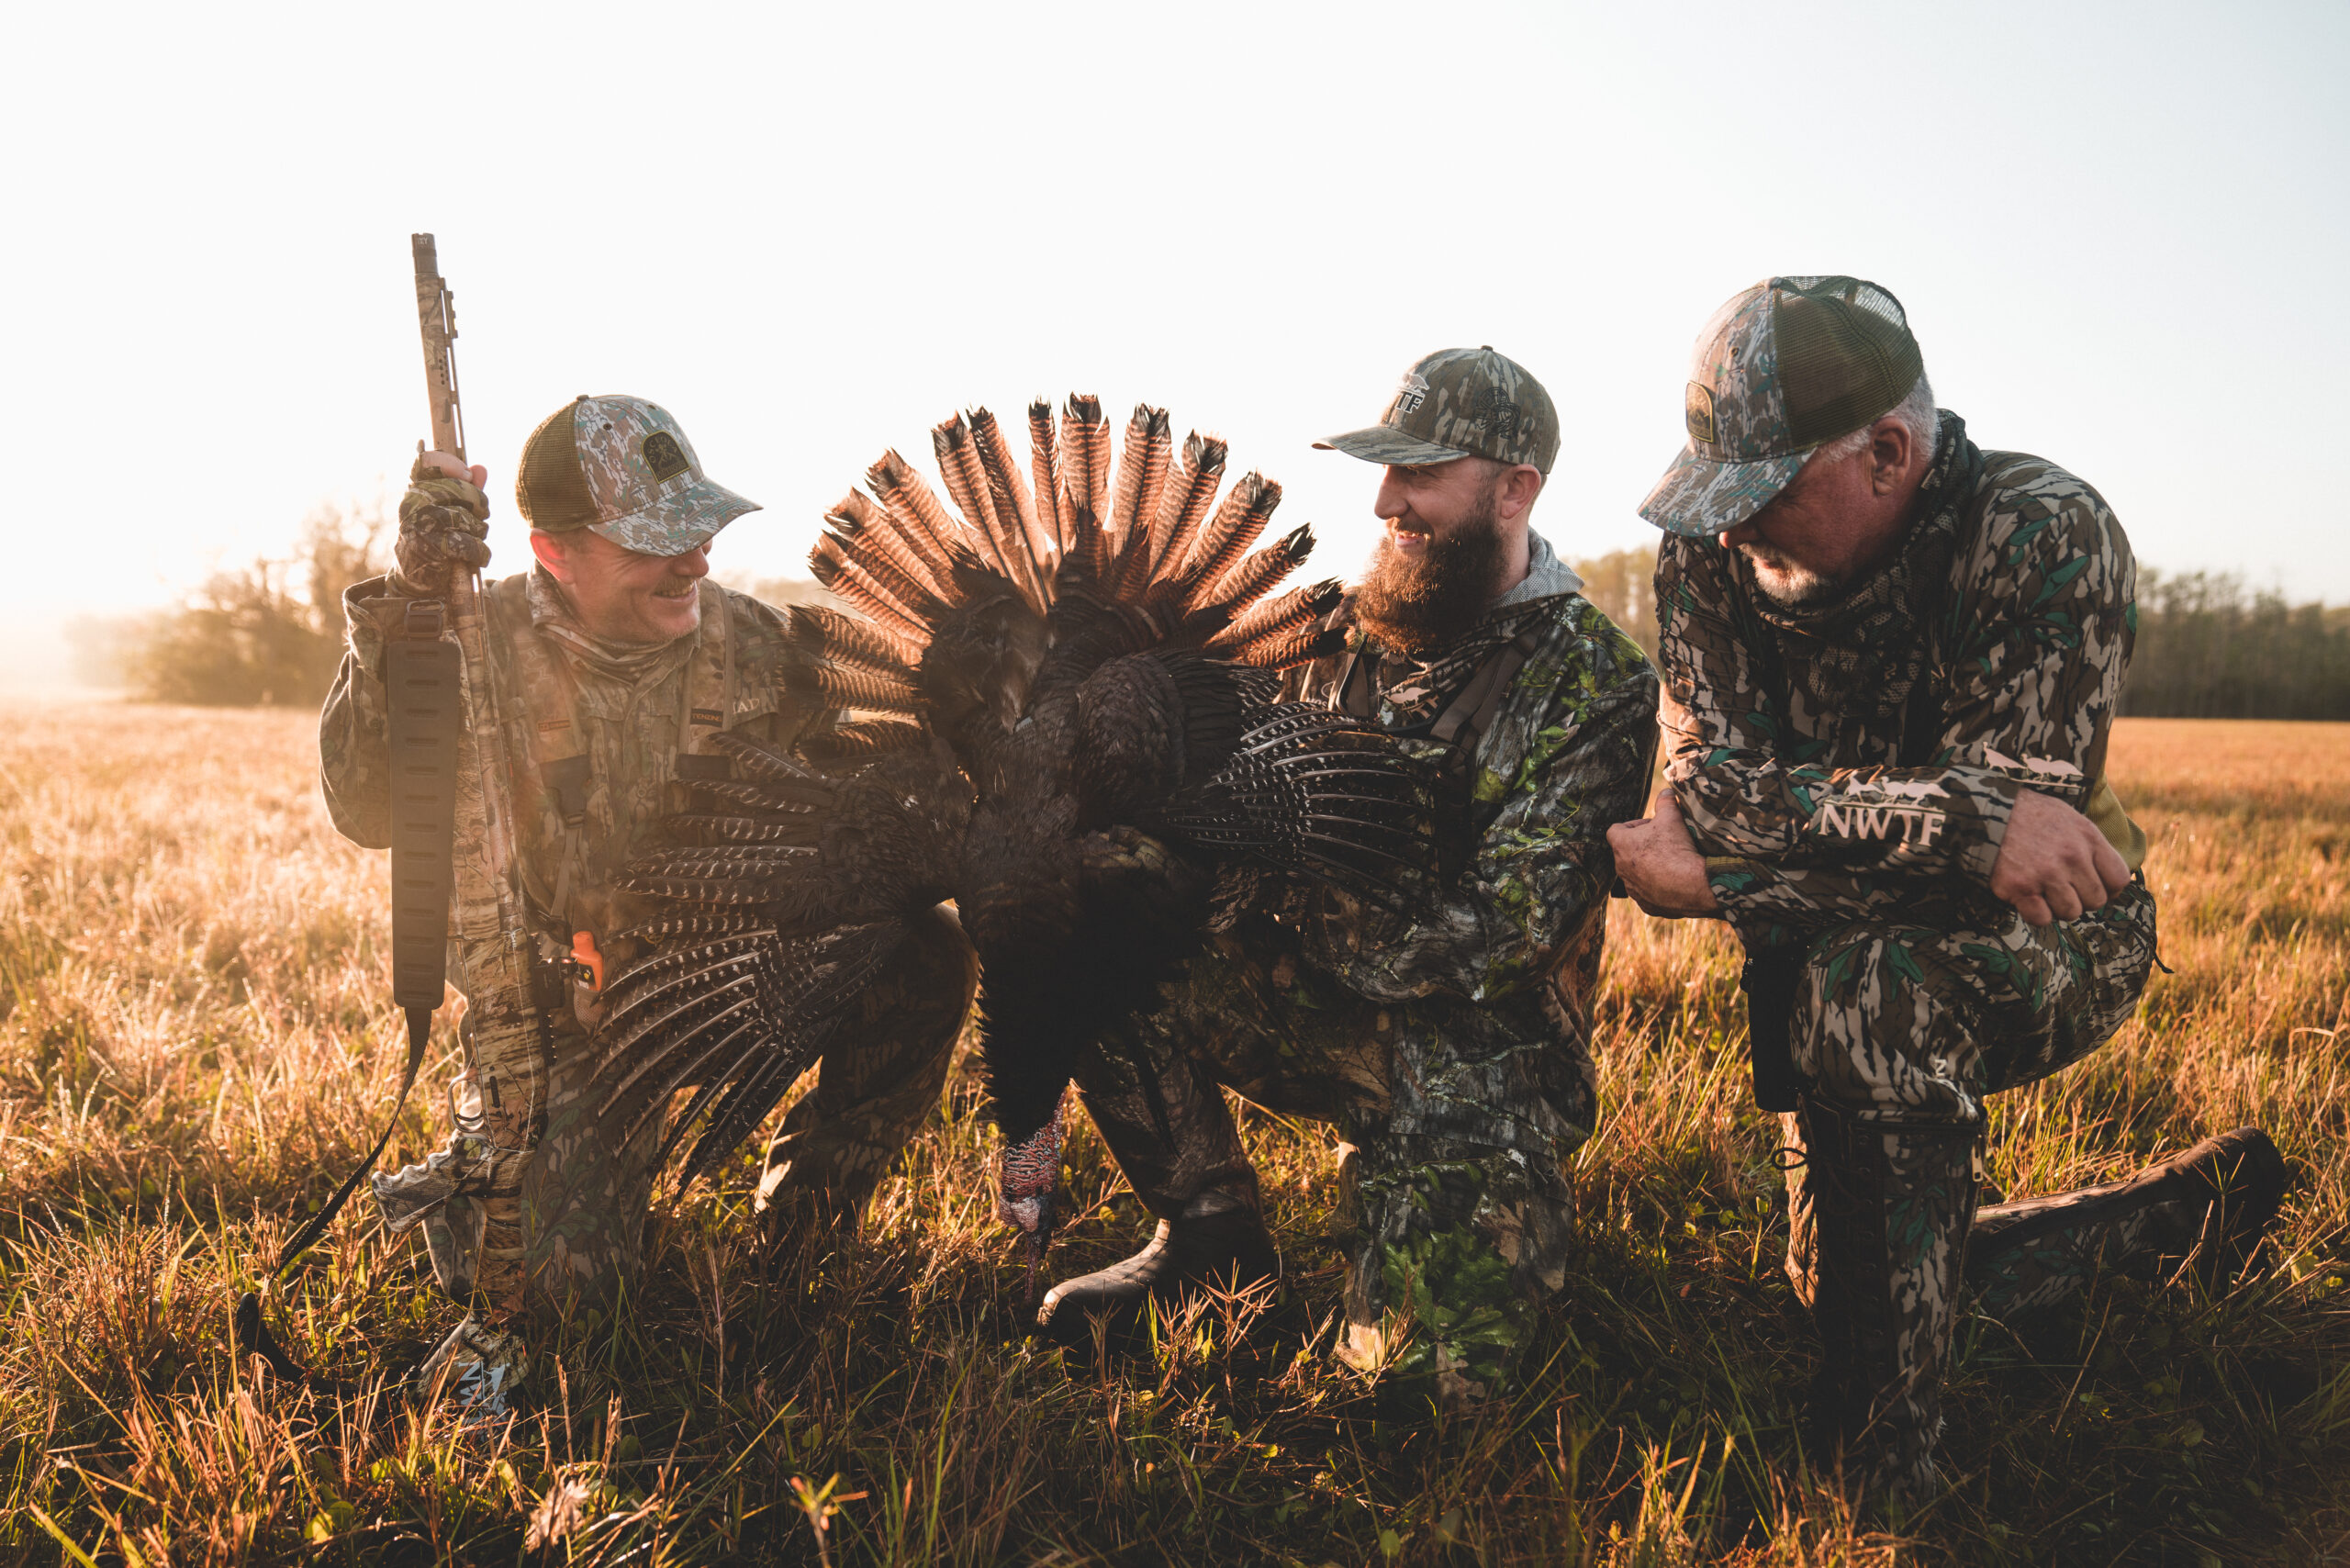 South Florida is the only place in the U.S. to hunt Osceola turkeys.